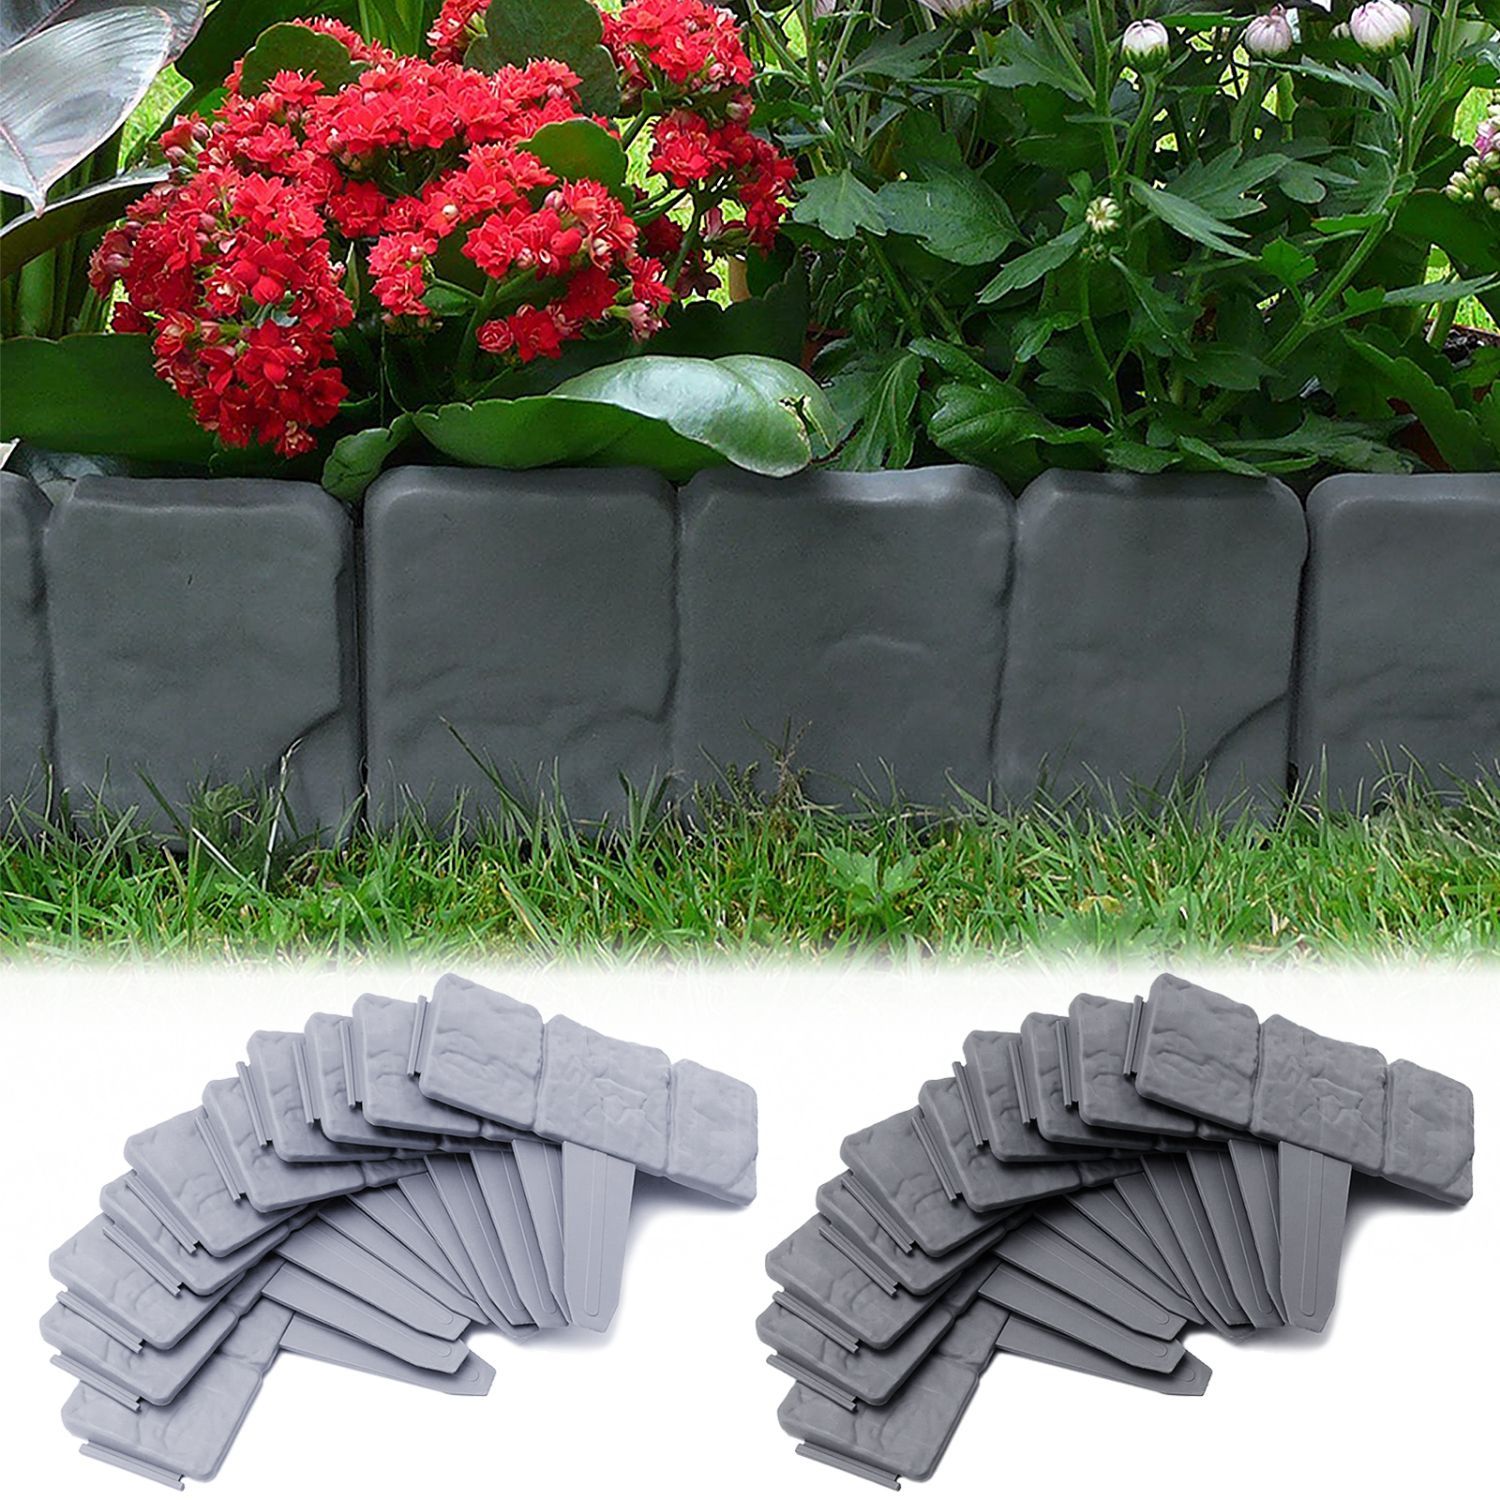 

Froadp Grey/charcoal Lawn Edging In Stone Look, Flower Bed Border Mowing Edge Edging Made Of Plastic, Flower Bed Edging Garden Fence